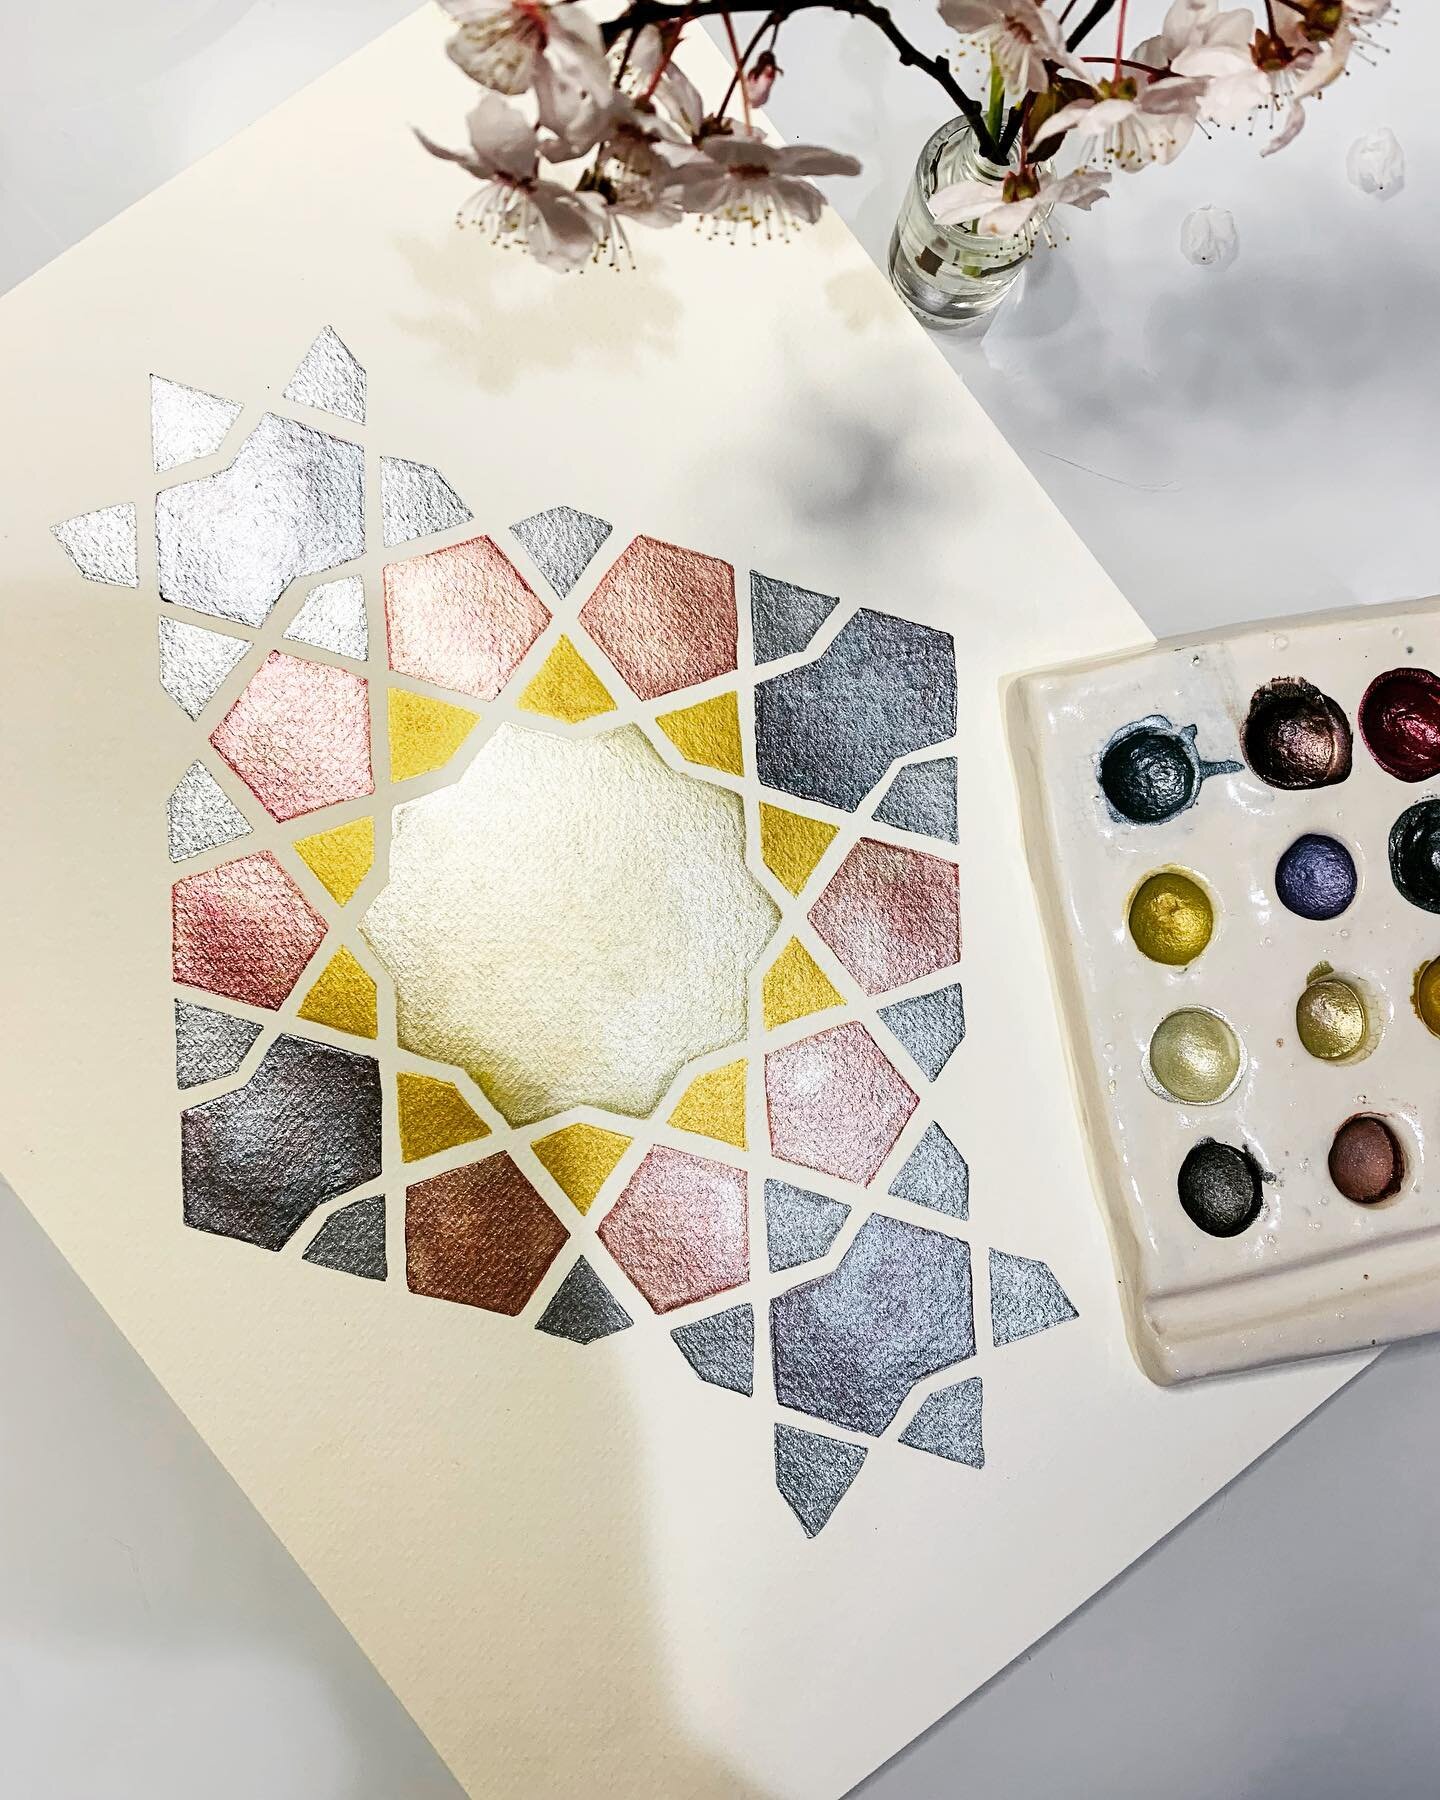 Complete mind shutdown and just filling colors - one of the reasons I love geometric designs 💎 
.
Few weeks ago I filled this palette with mica pigments well I missed a imp step when making paint! Forgot to add titanium dioxide and the entire batch 